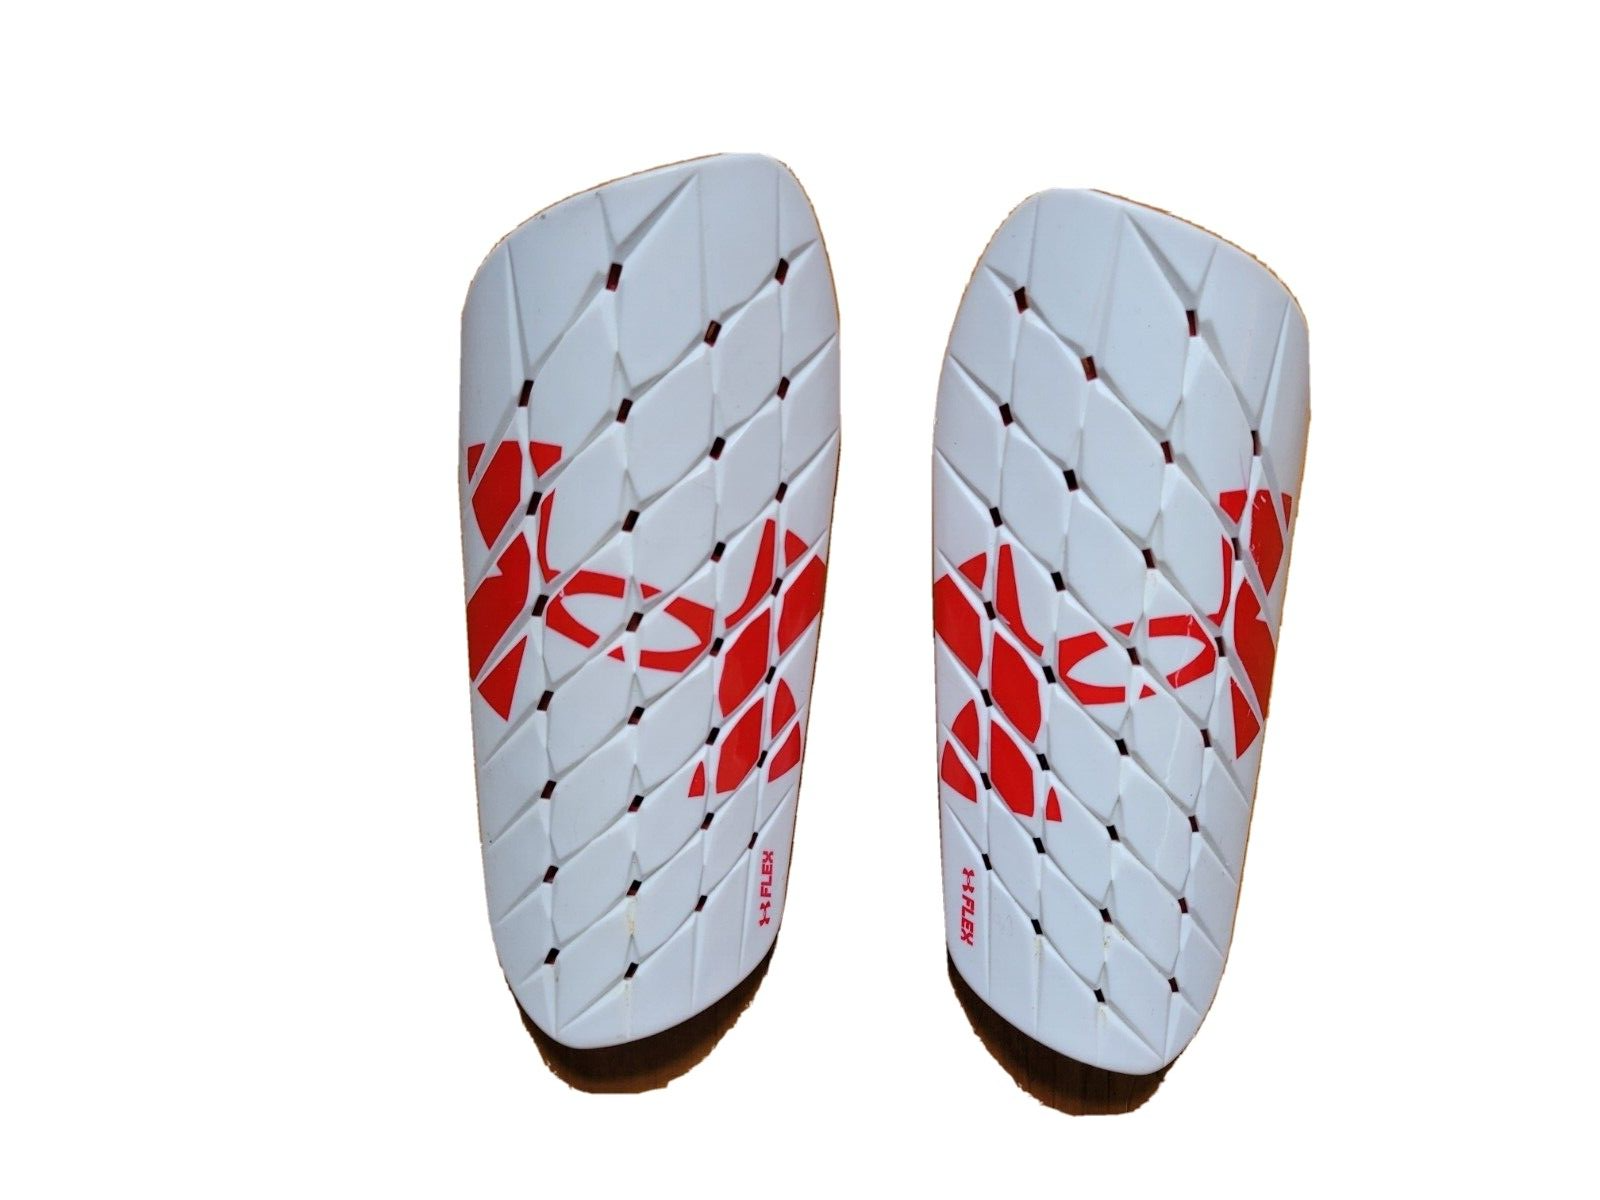 Under Armour Youth Shin Guards - $6.91